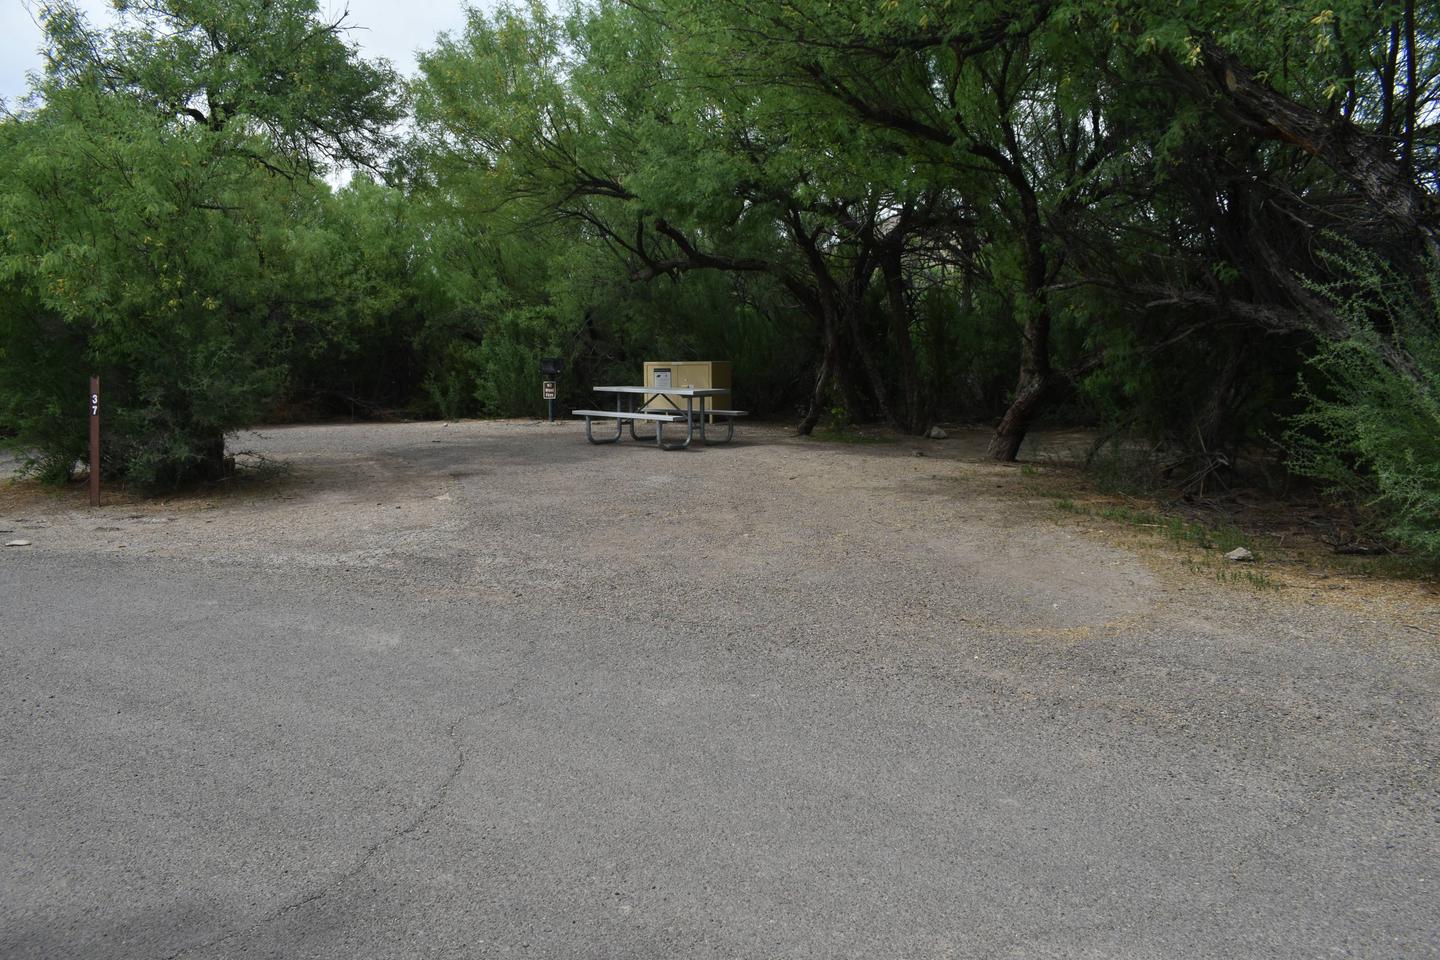 Distant view of the parking area from the main road. The driveway is curved, with tall trees and bushes that offer some shade and privacy. Parking area for Site 37